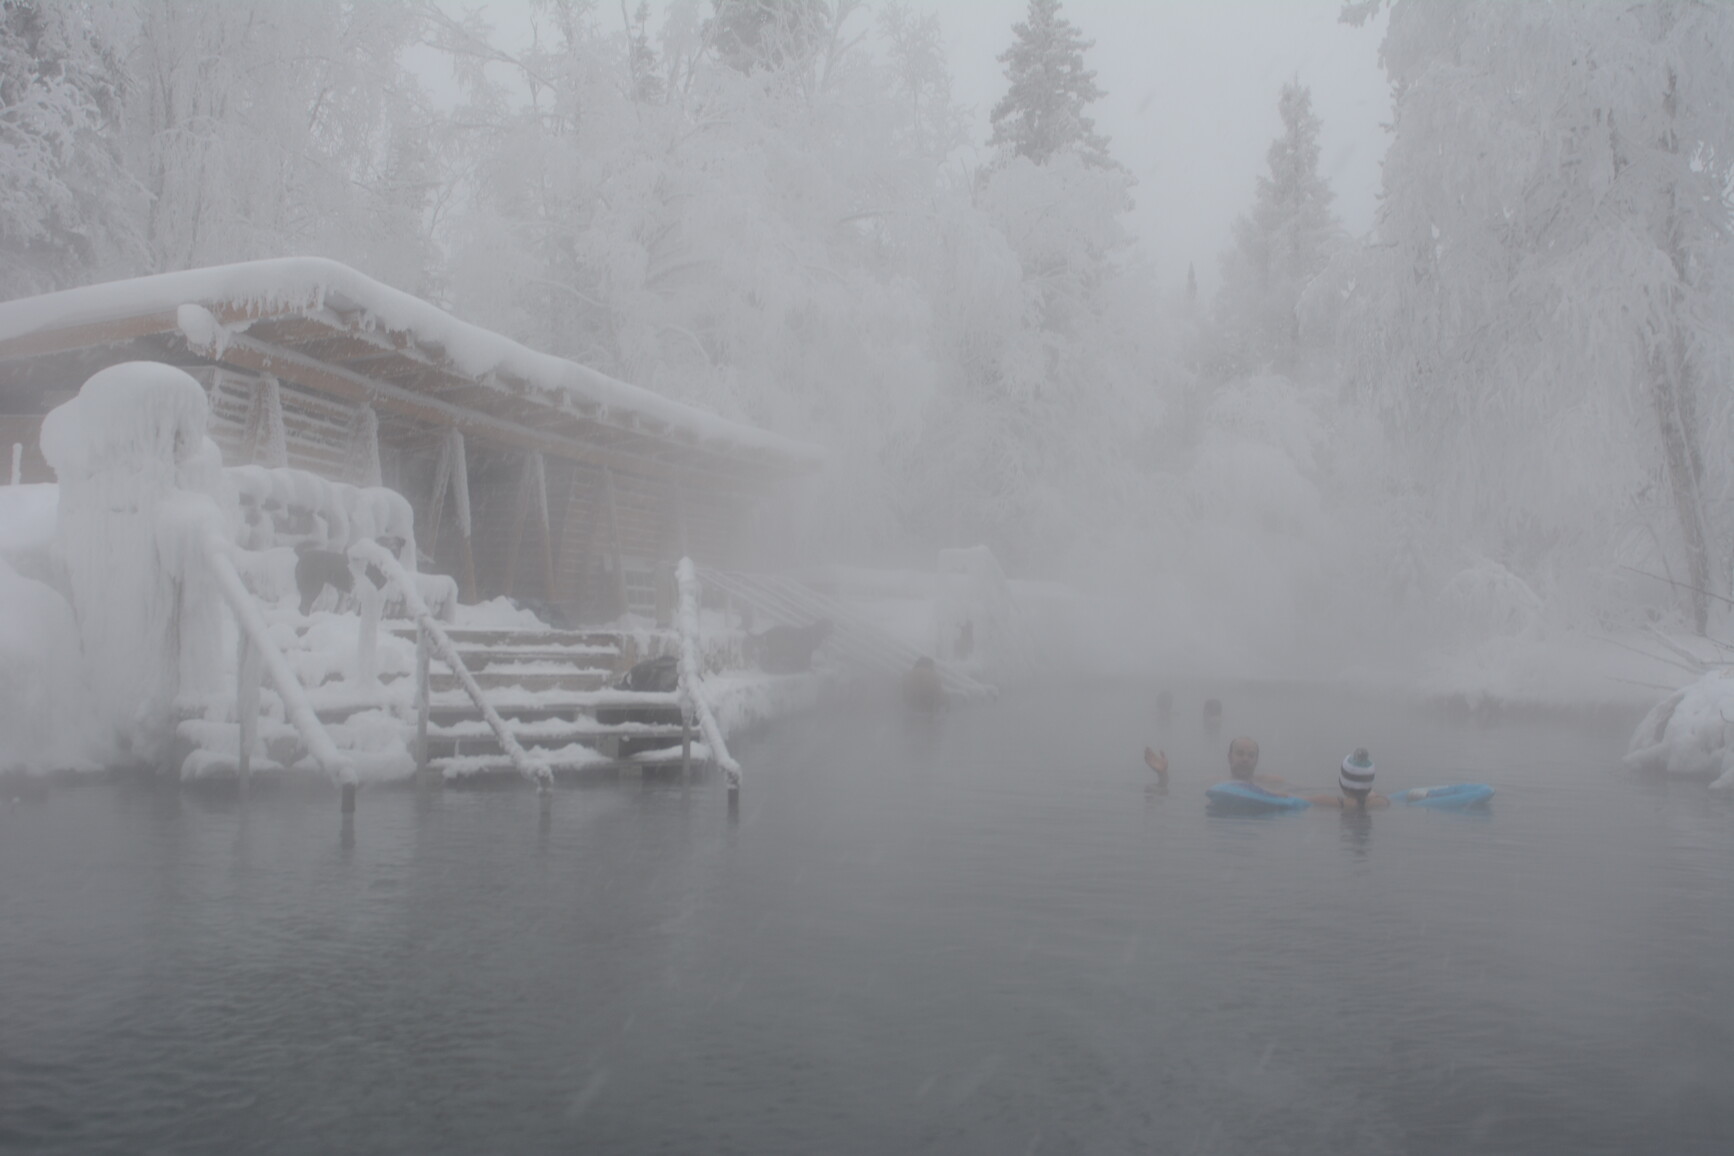 Laird River Hot Springs facility. Though the mist, park visitors are seen enjoying Alpha pool with water temperatures ranging from 42°C to 52°C.